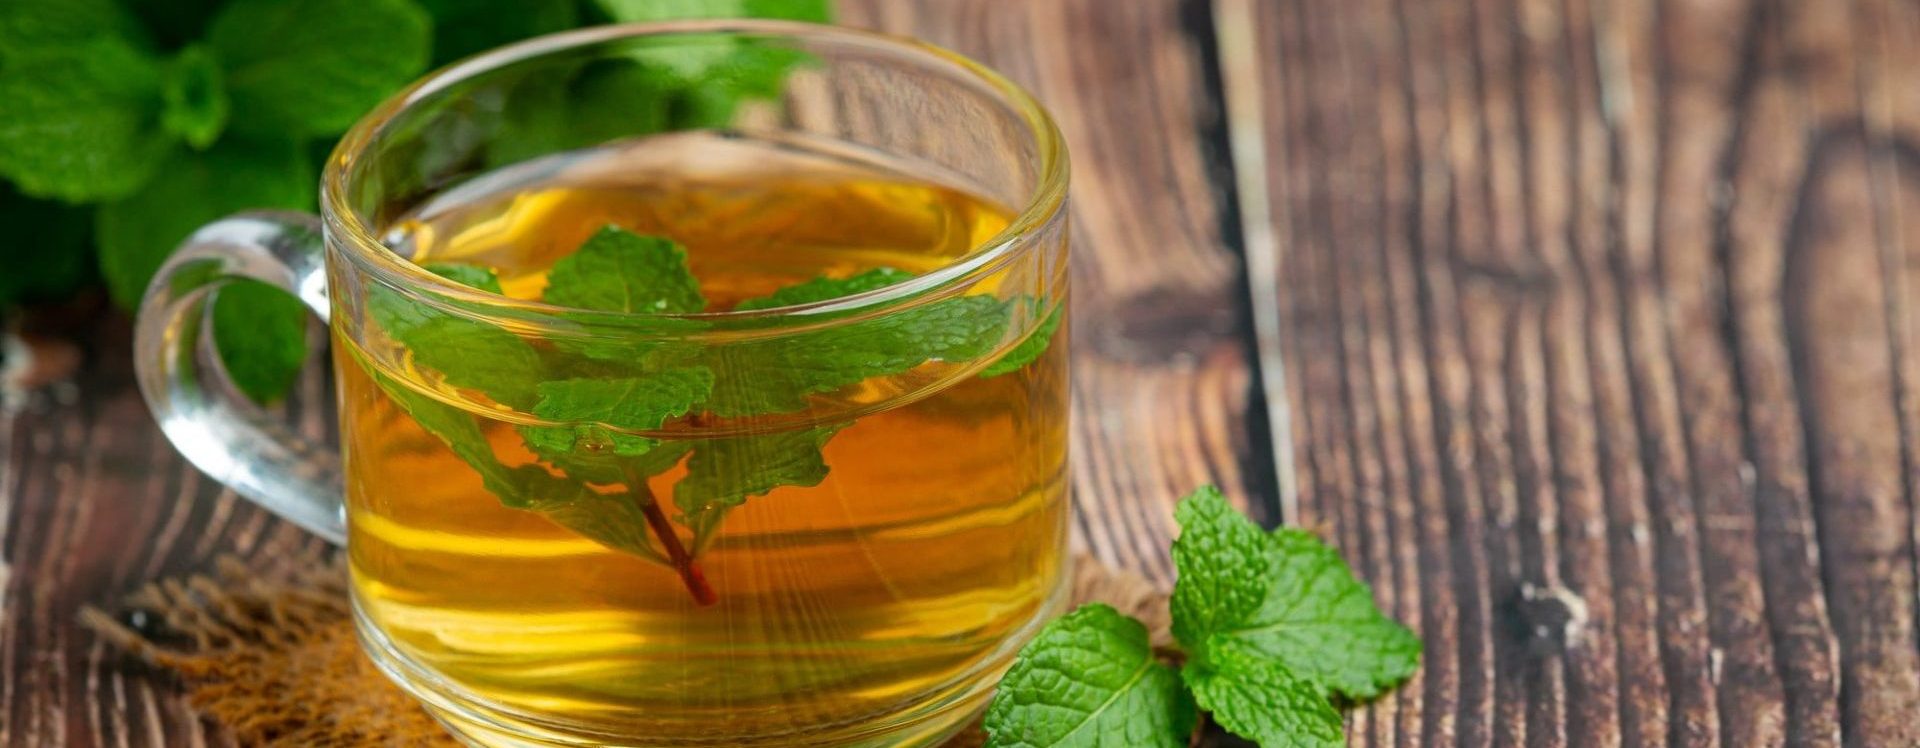 Does Peppermint Tea Help With Bloating